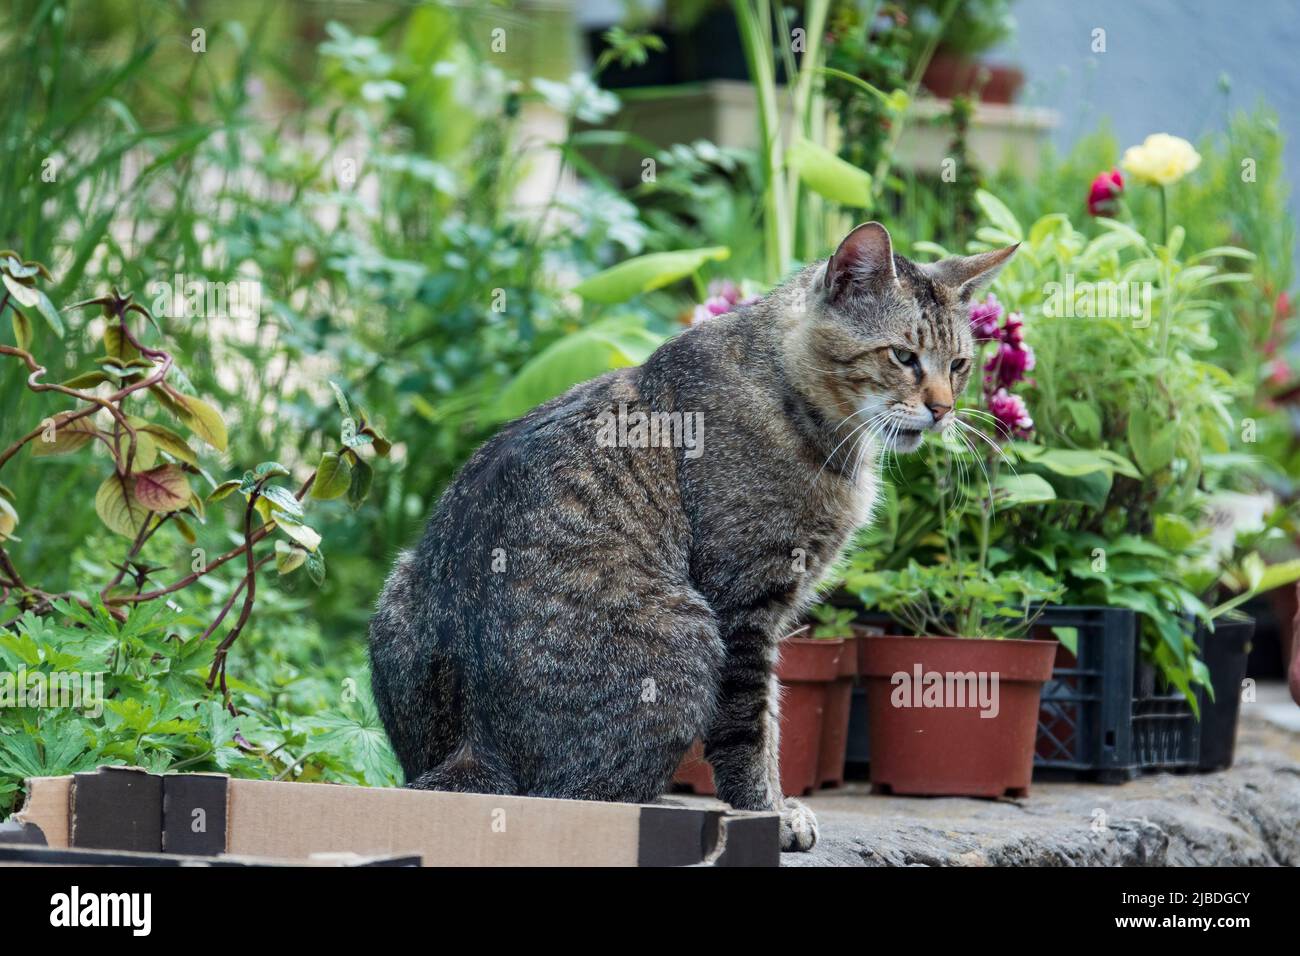 Grumpy domestic cat in the garden. Funny cat on the fence with garden plants Stock Photo